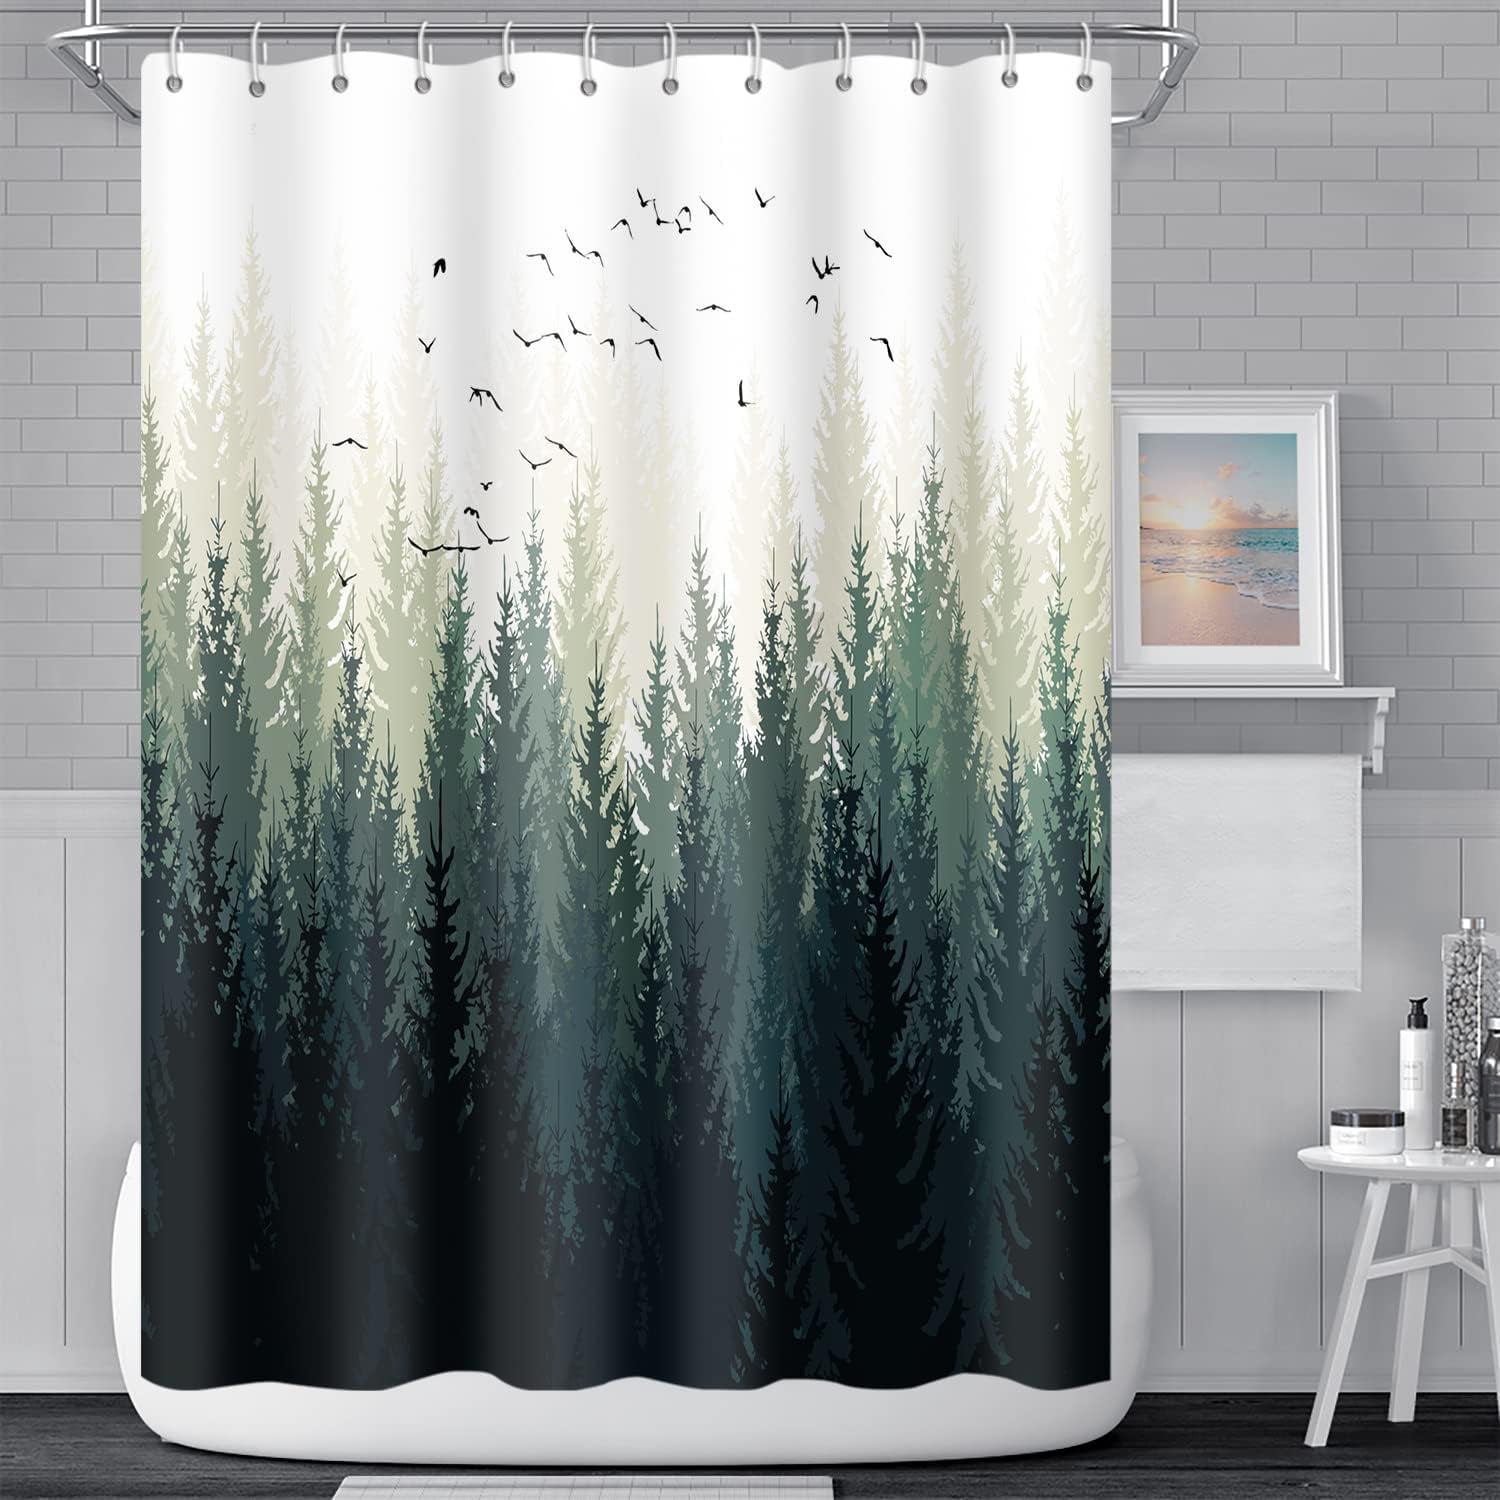 JOOCAR Watercolor Brush Strokes Fabric Shower Curtain with Hooks Artistic  Contemporary Creative Art Painting Bath Shower Curtain Polyester 72x72 Inch  for Bathrooms Bathtubs Camping 